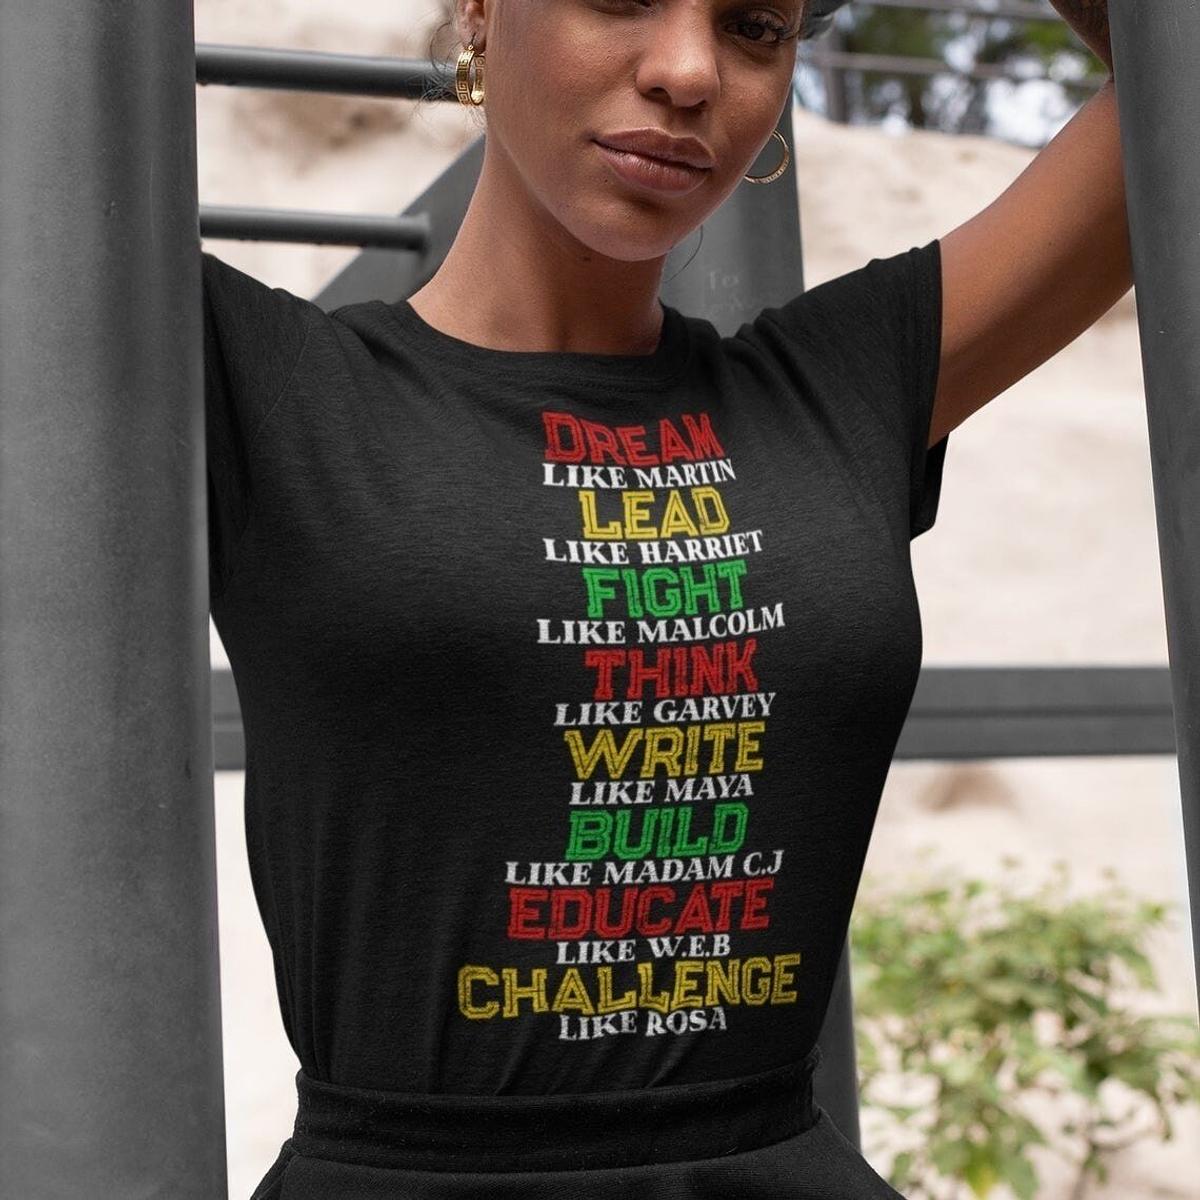 Black History Quote T-shirt